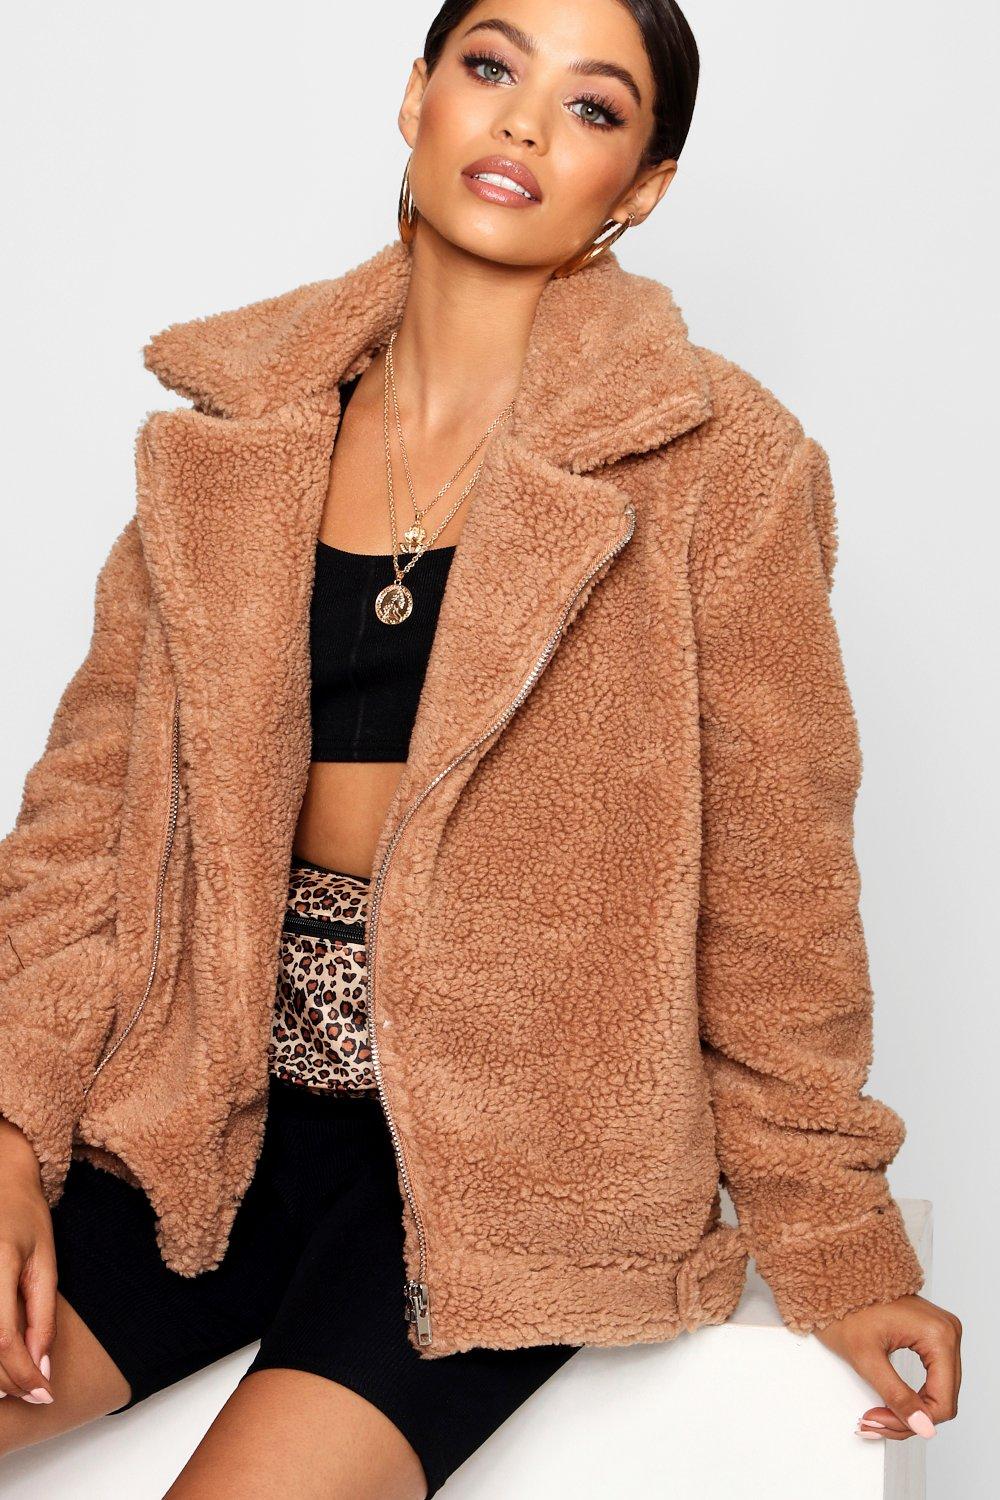 How to Style a Teddy Coat 9 Outfit Ideas for this Fall/Winter